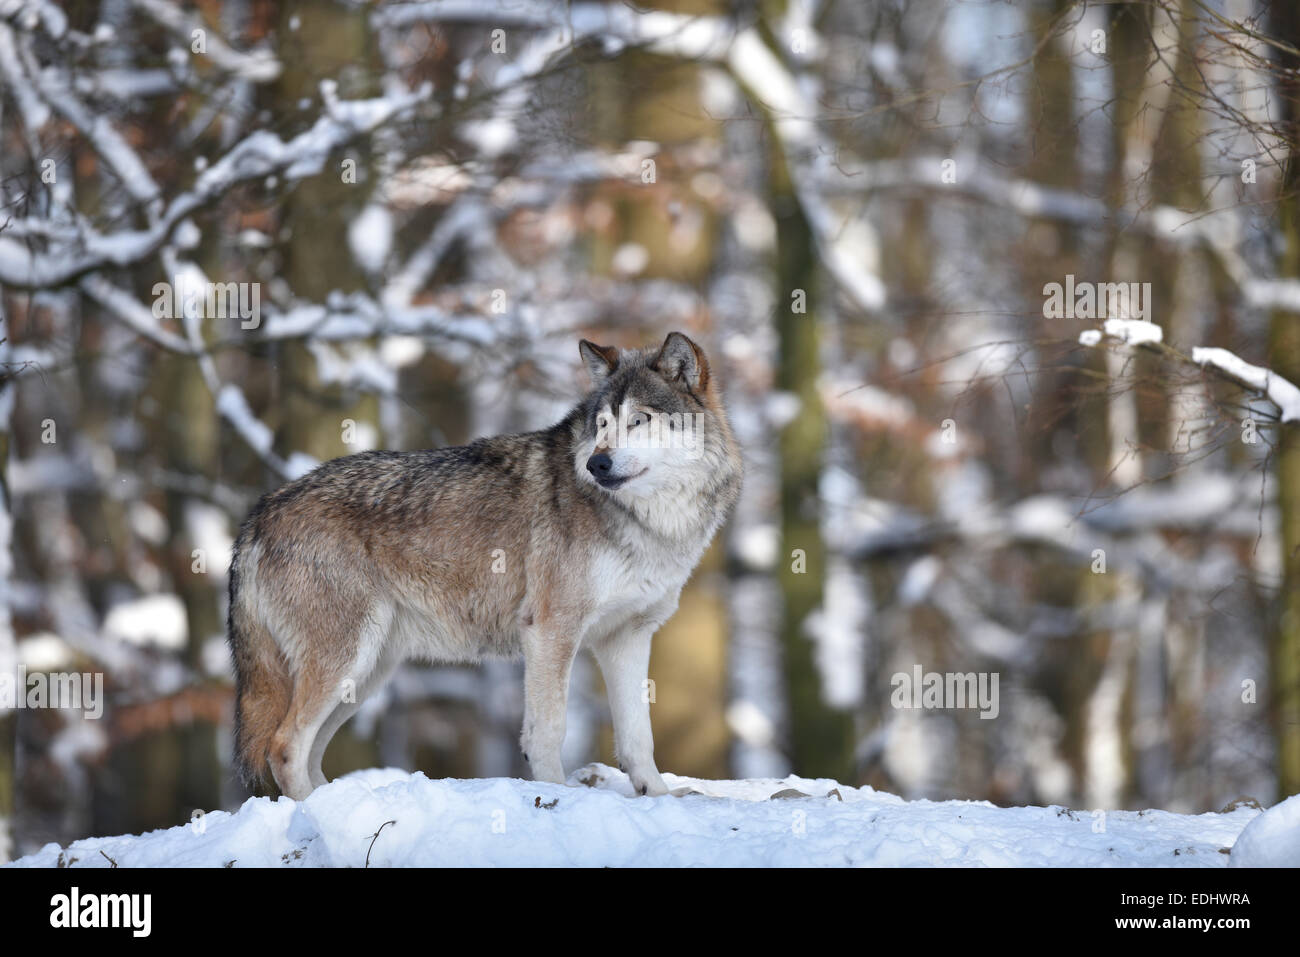 Northwestern Wolf High Resolution Stock Photography and Images - Alamy